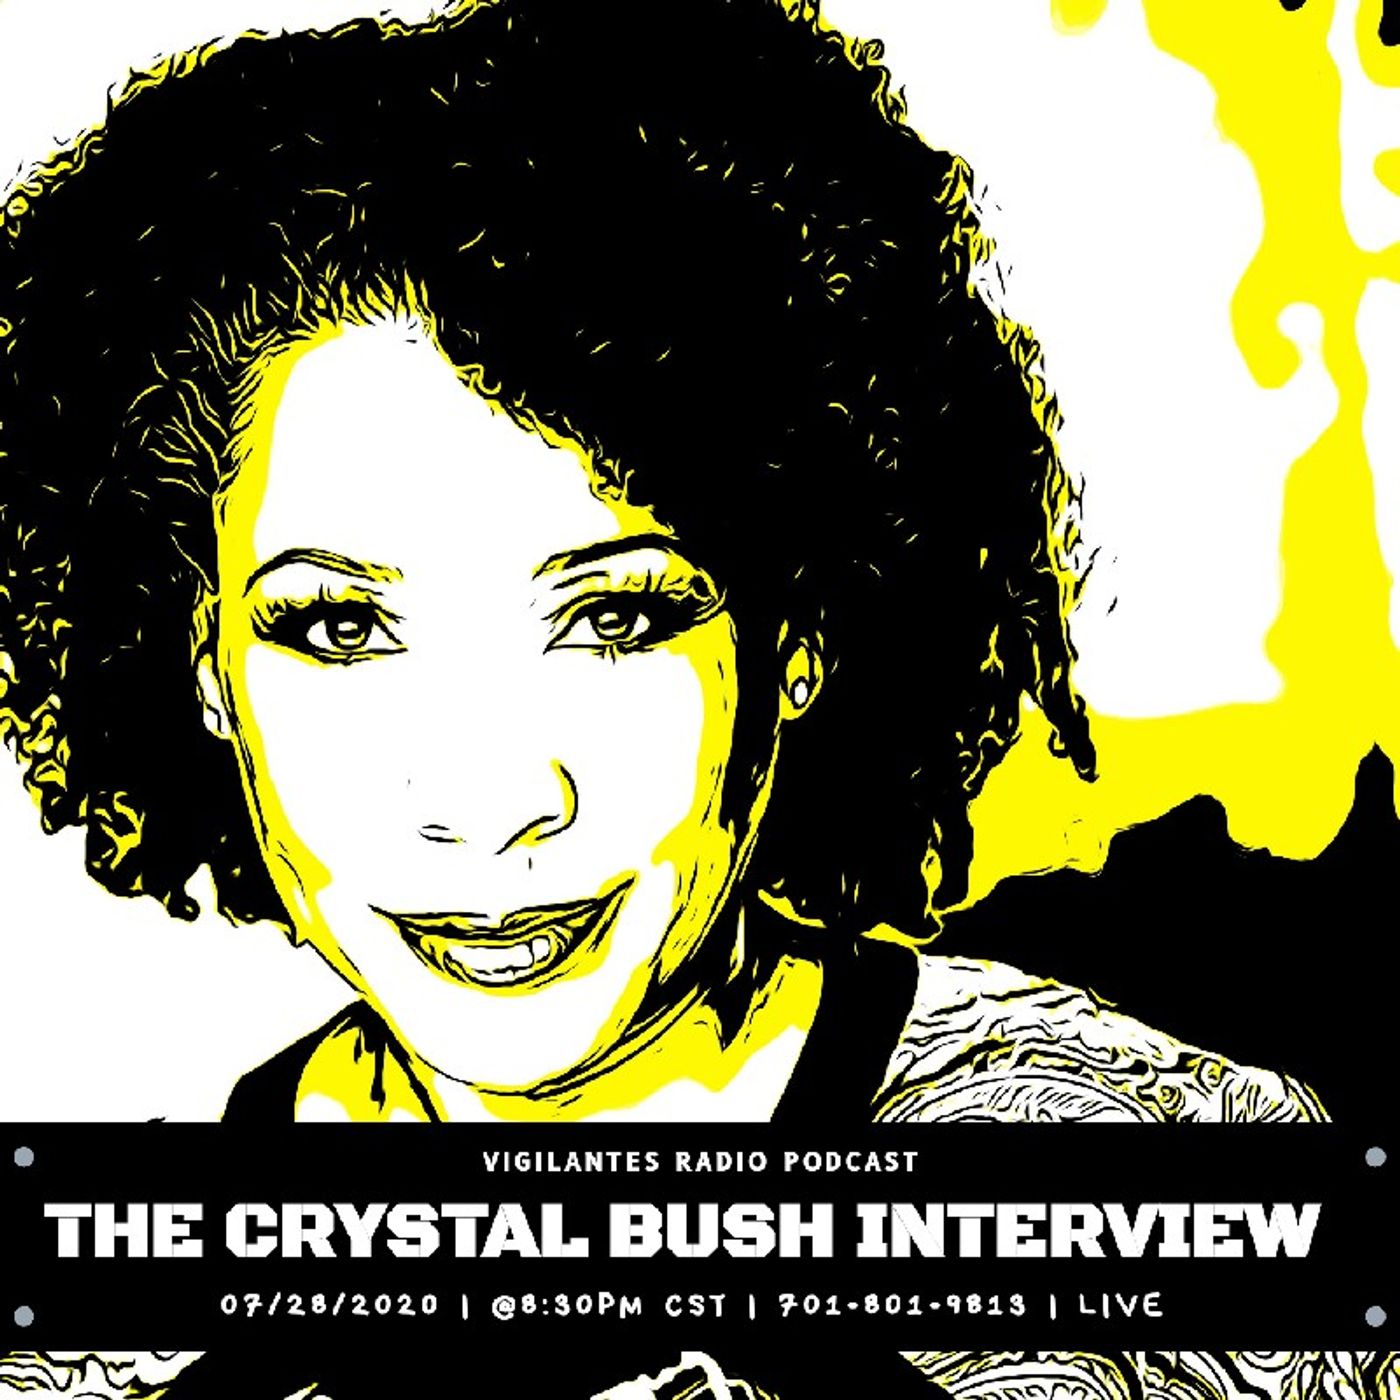 The Crystal Bush Interview. Image